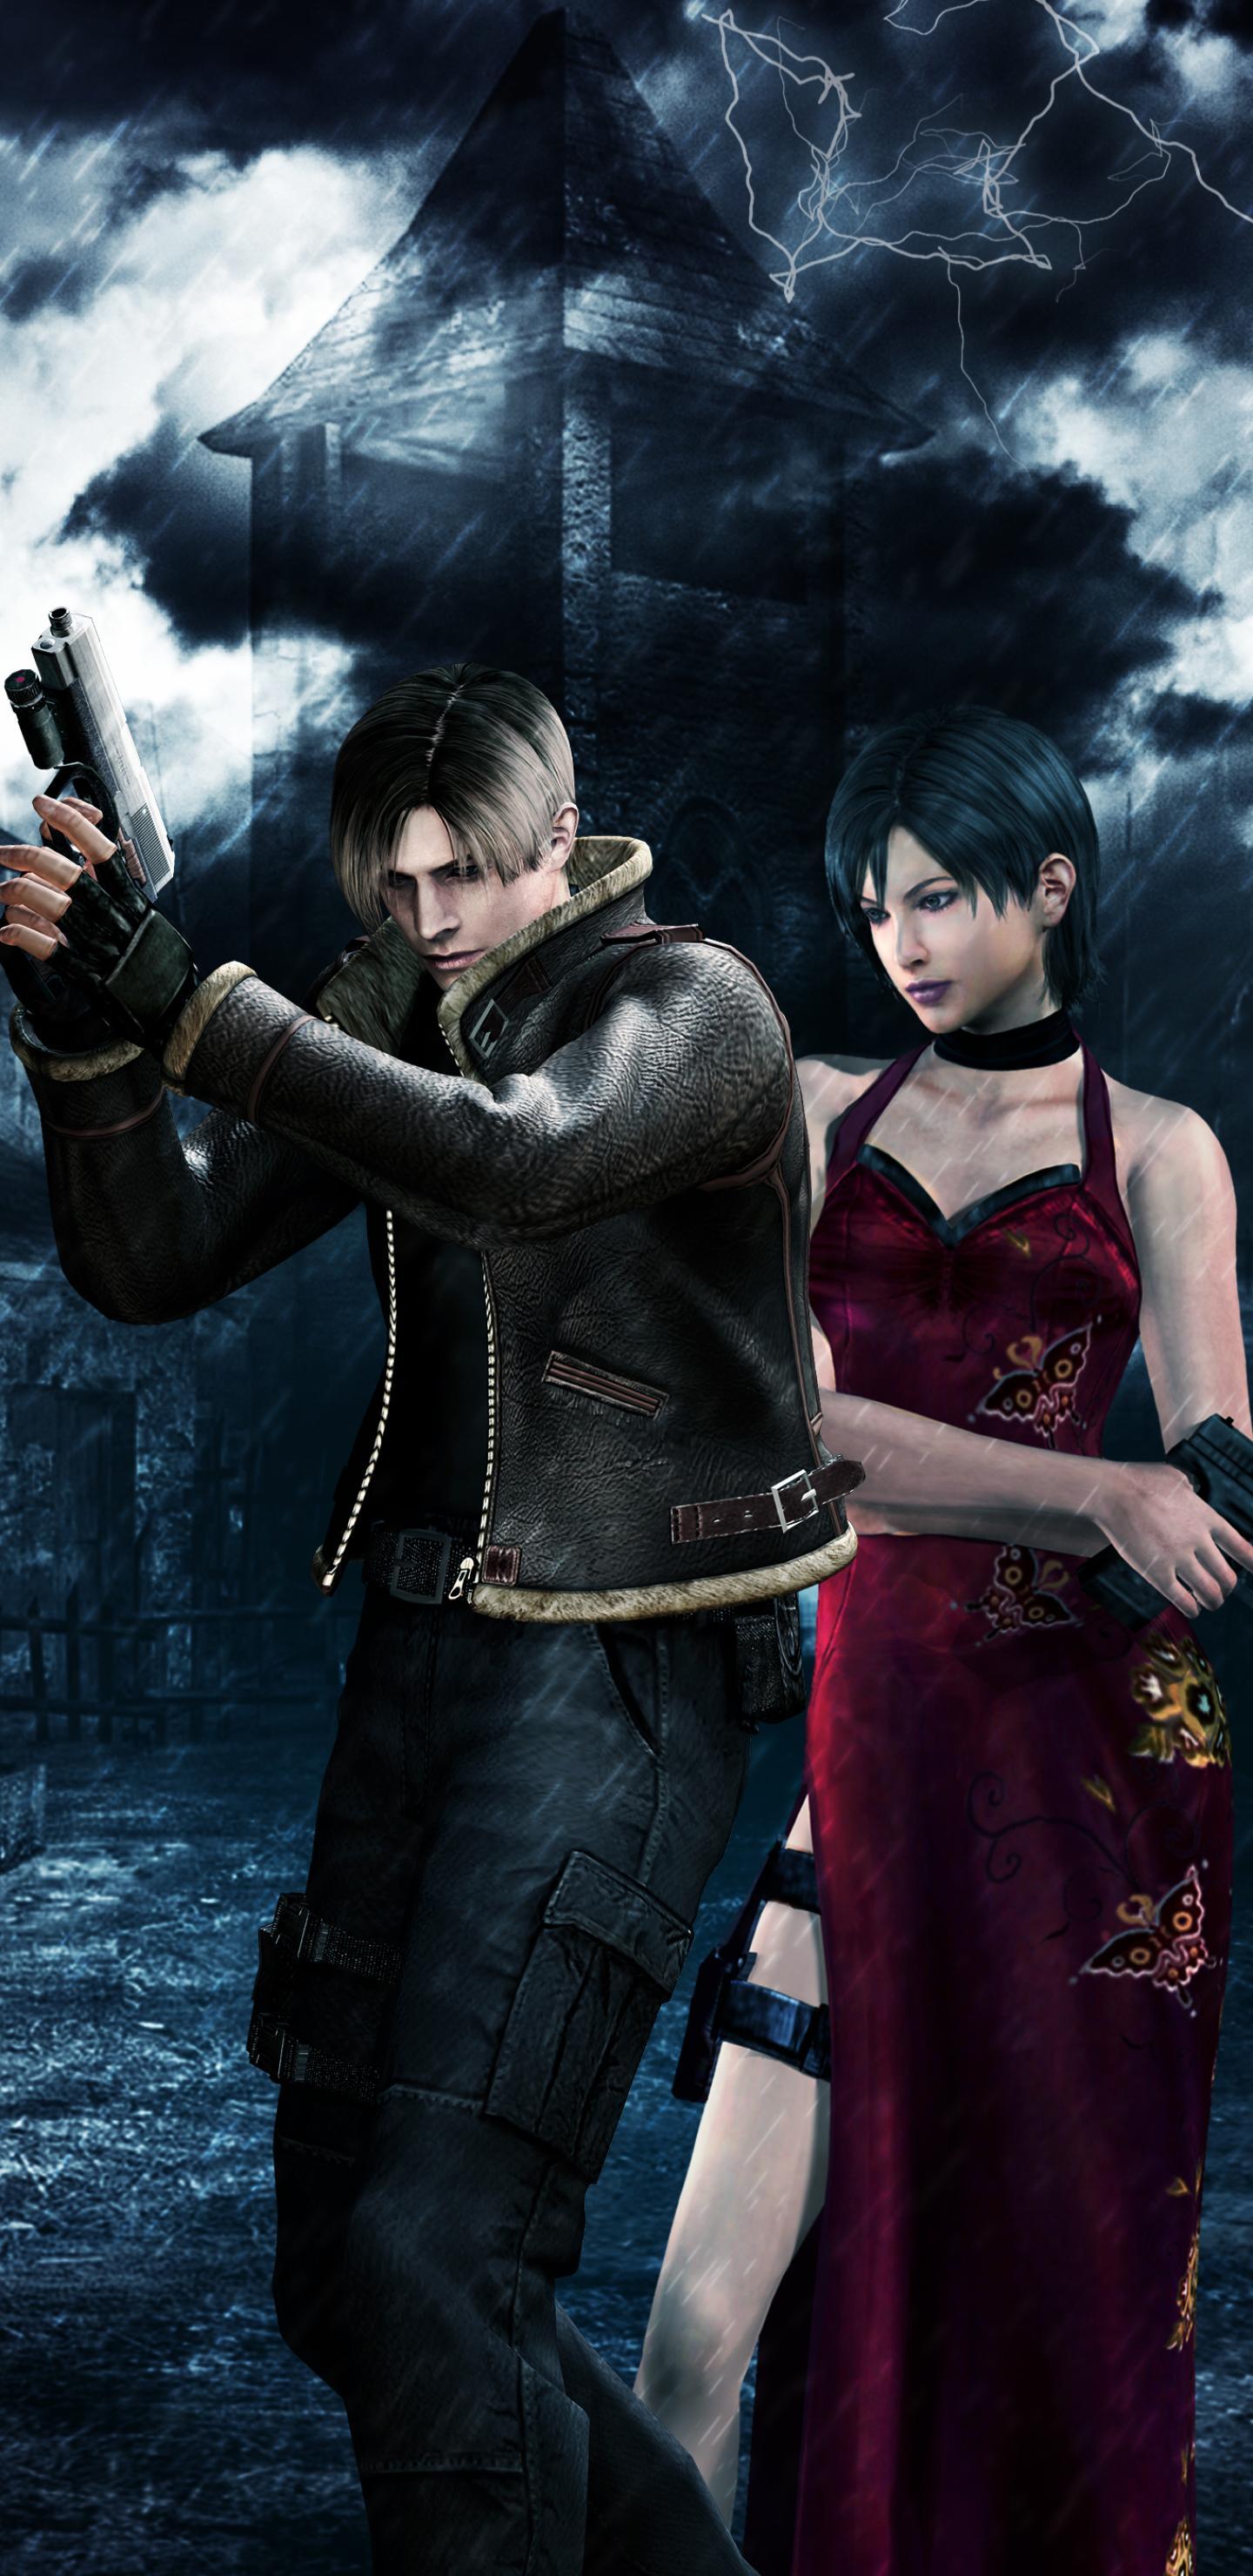 Resident Evil 4 Phone Wallpapers - Wallpaper Cave